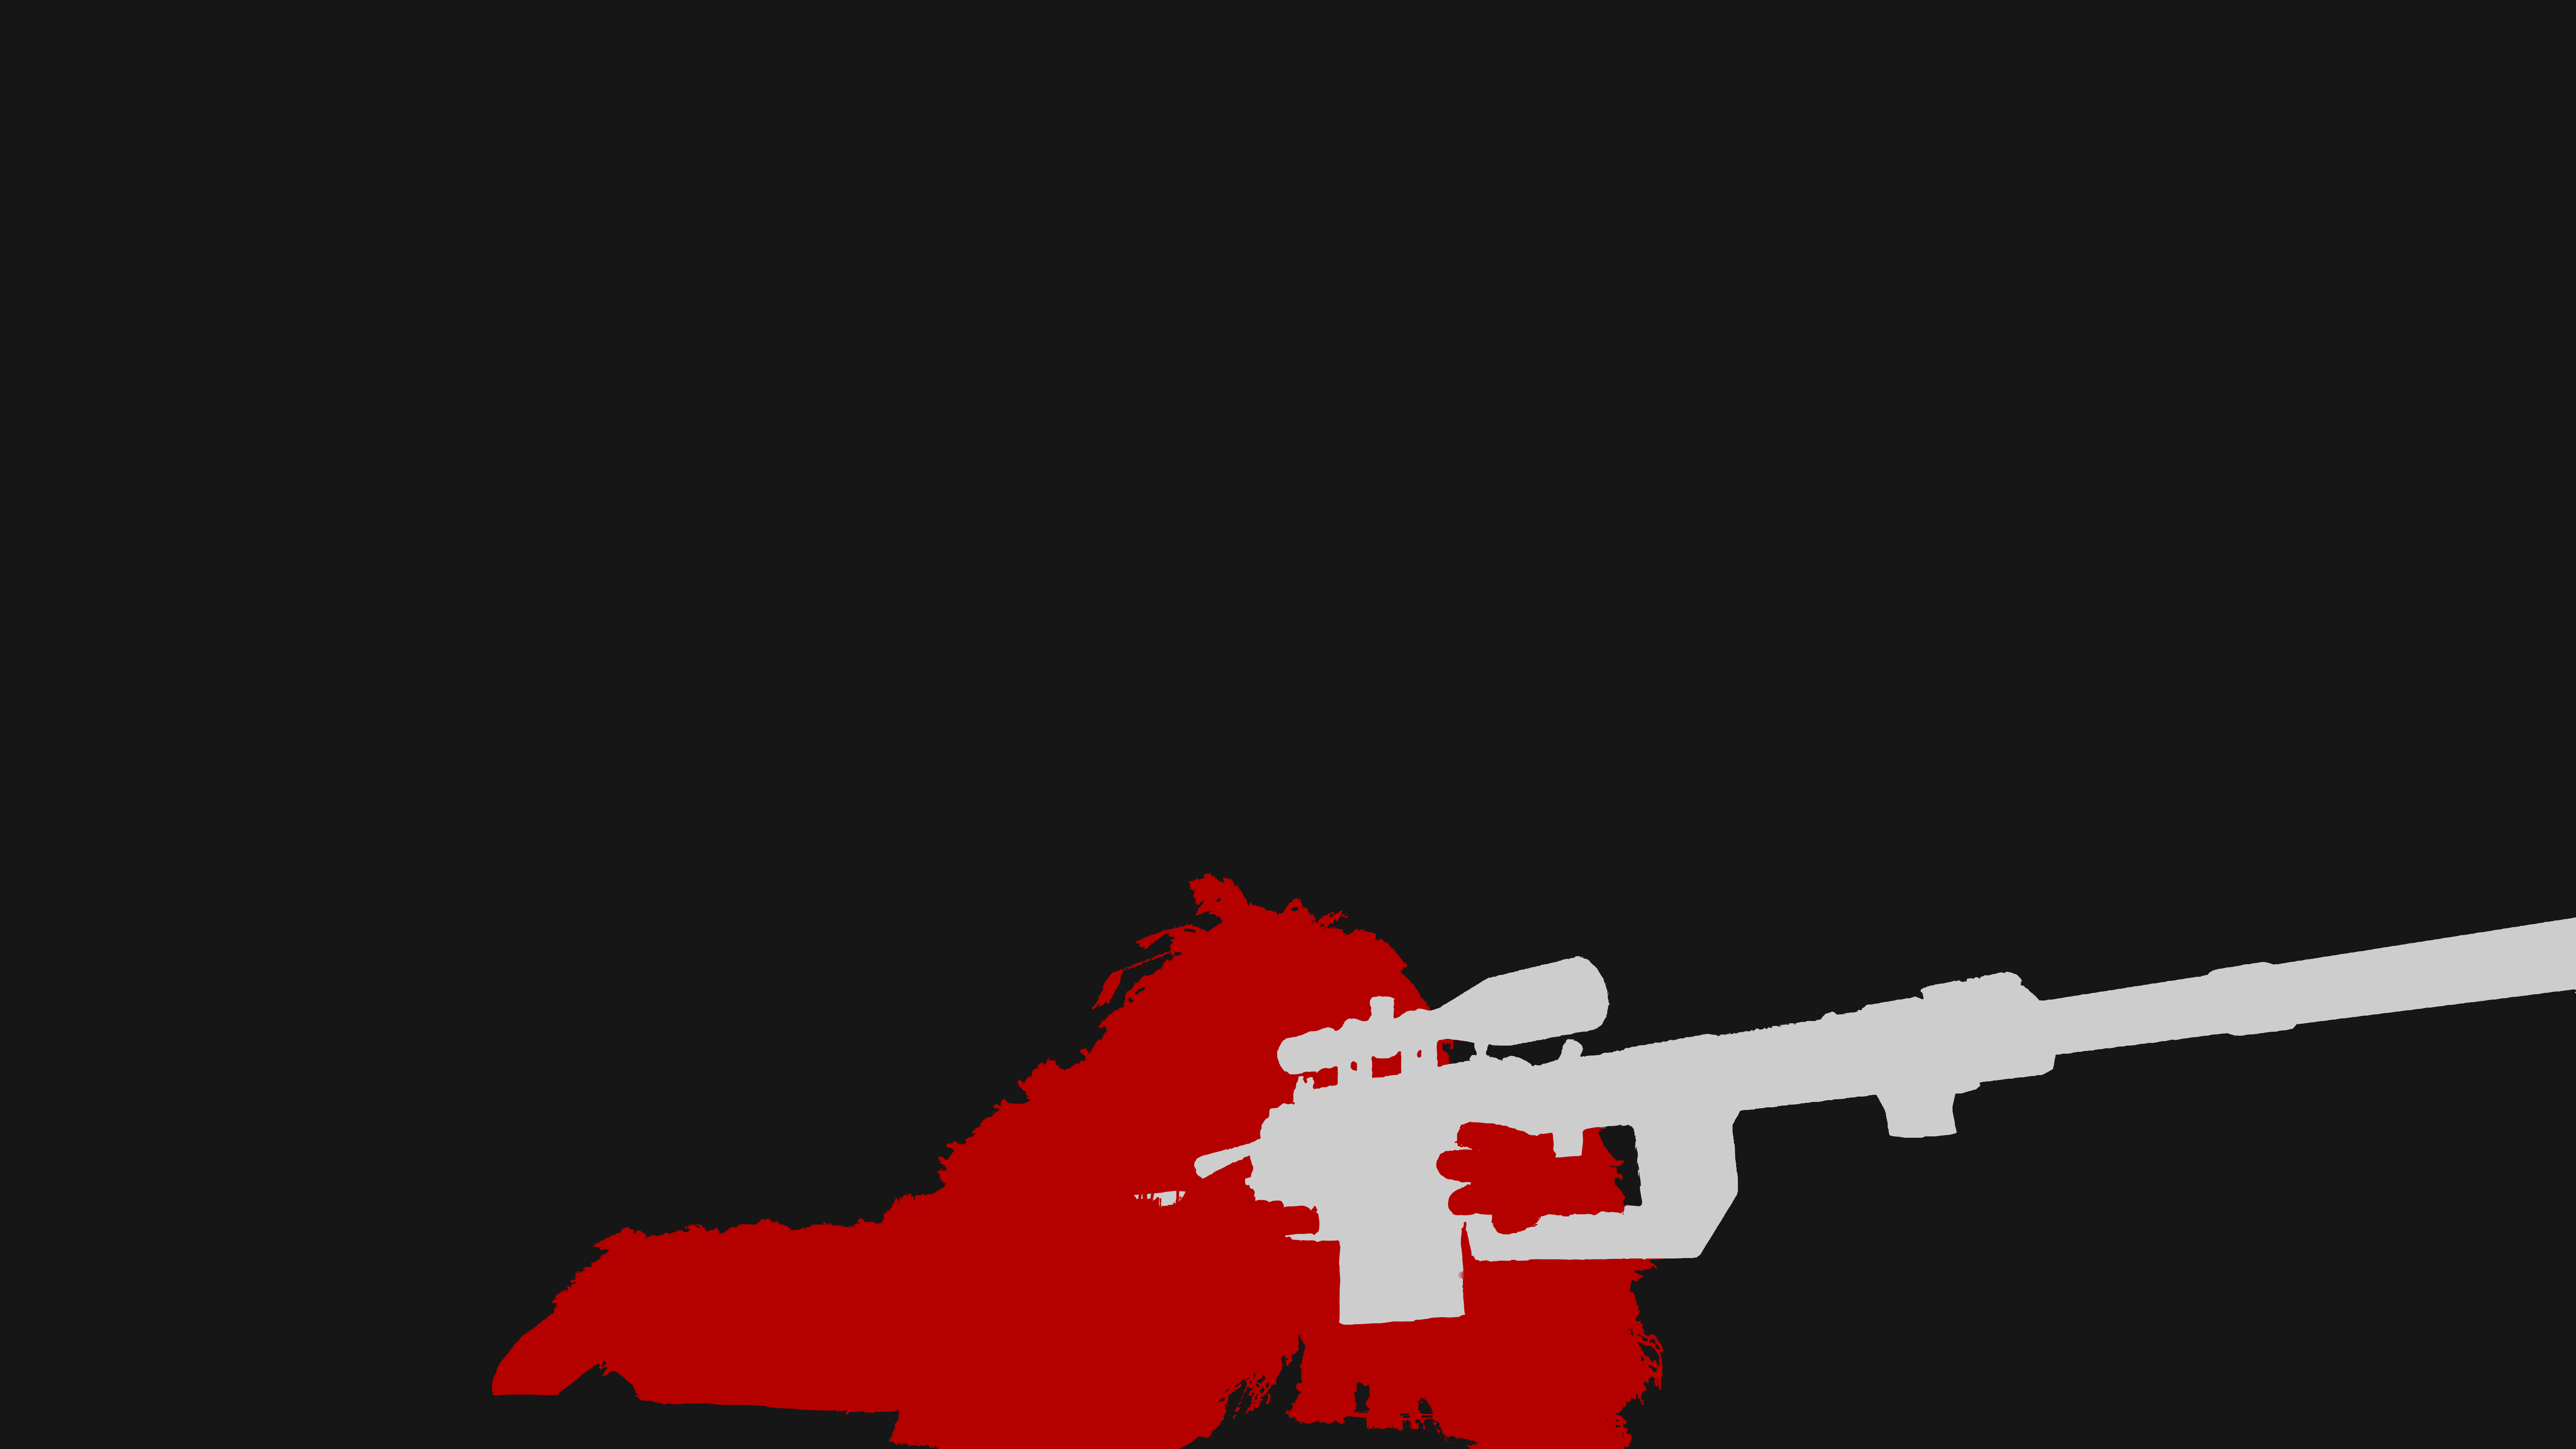 Arma 3 Wallpaper - Red and white sniper by CaptainAweesome on